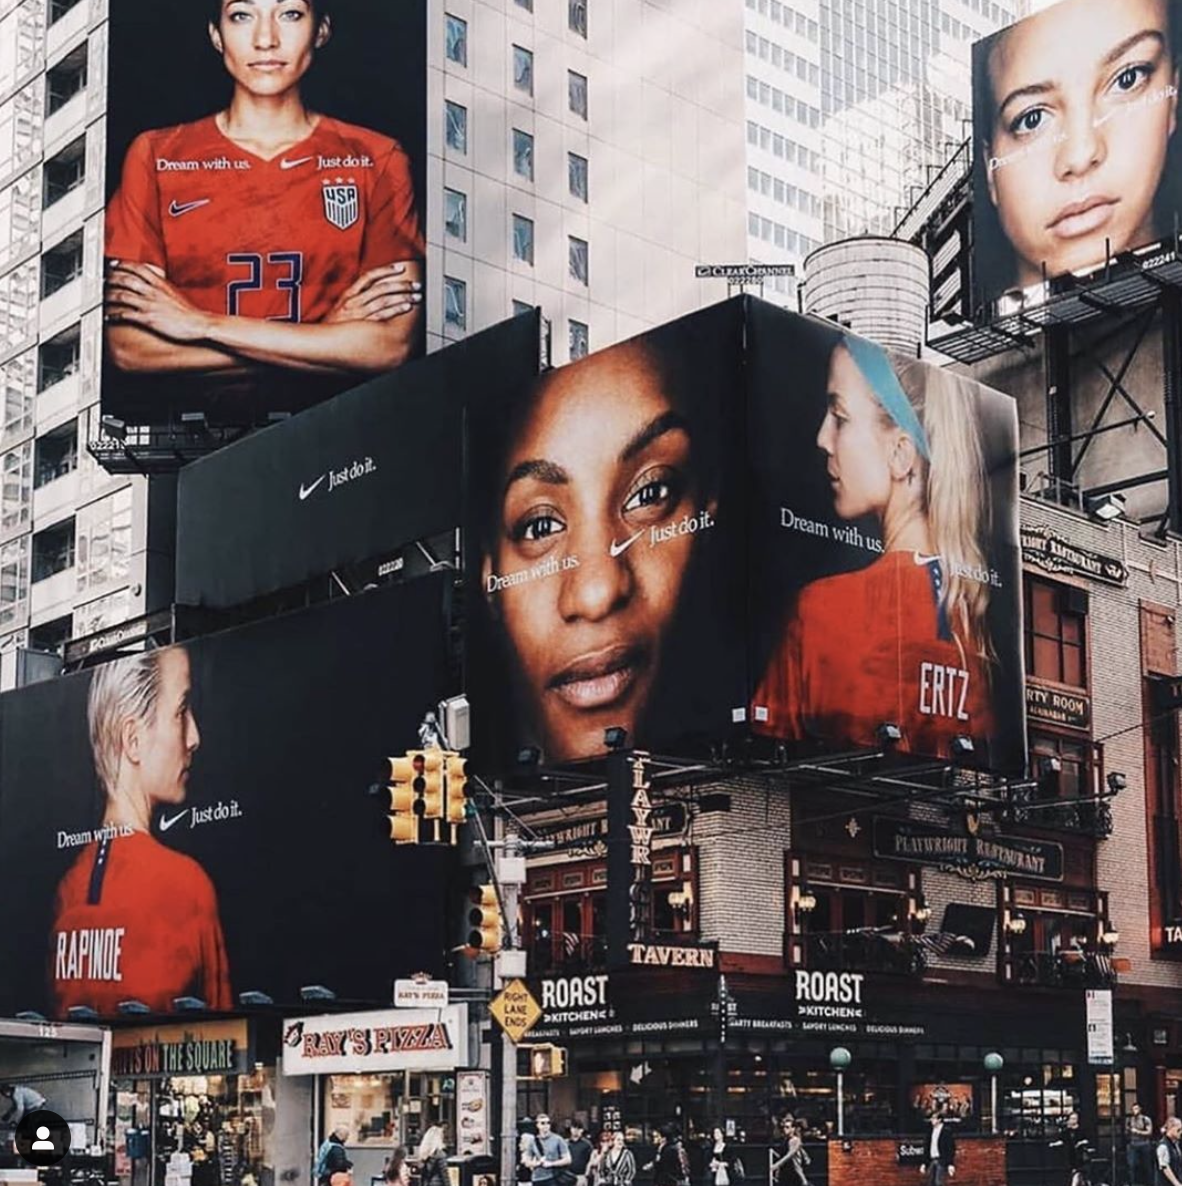 Clear Channels work for Nike football